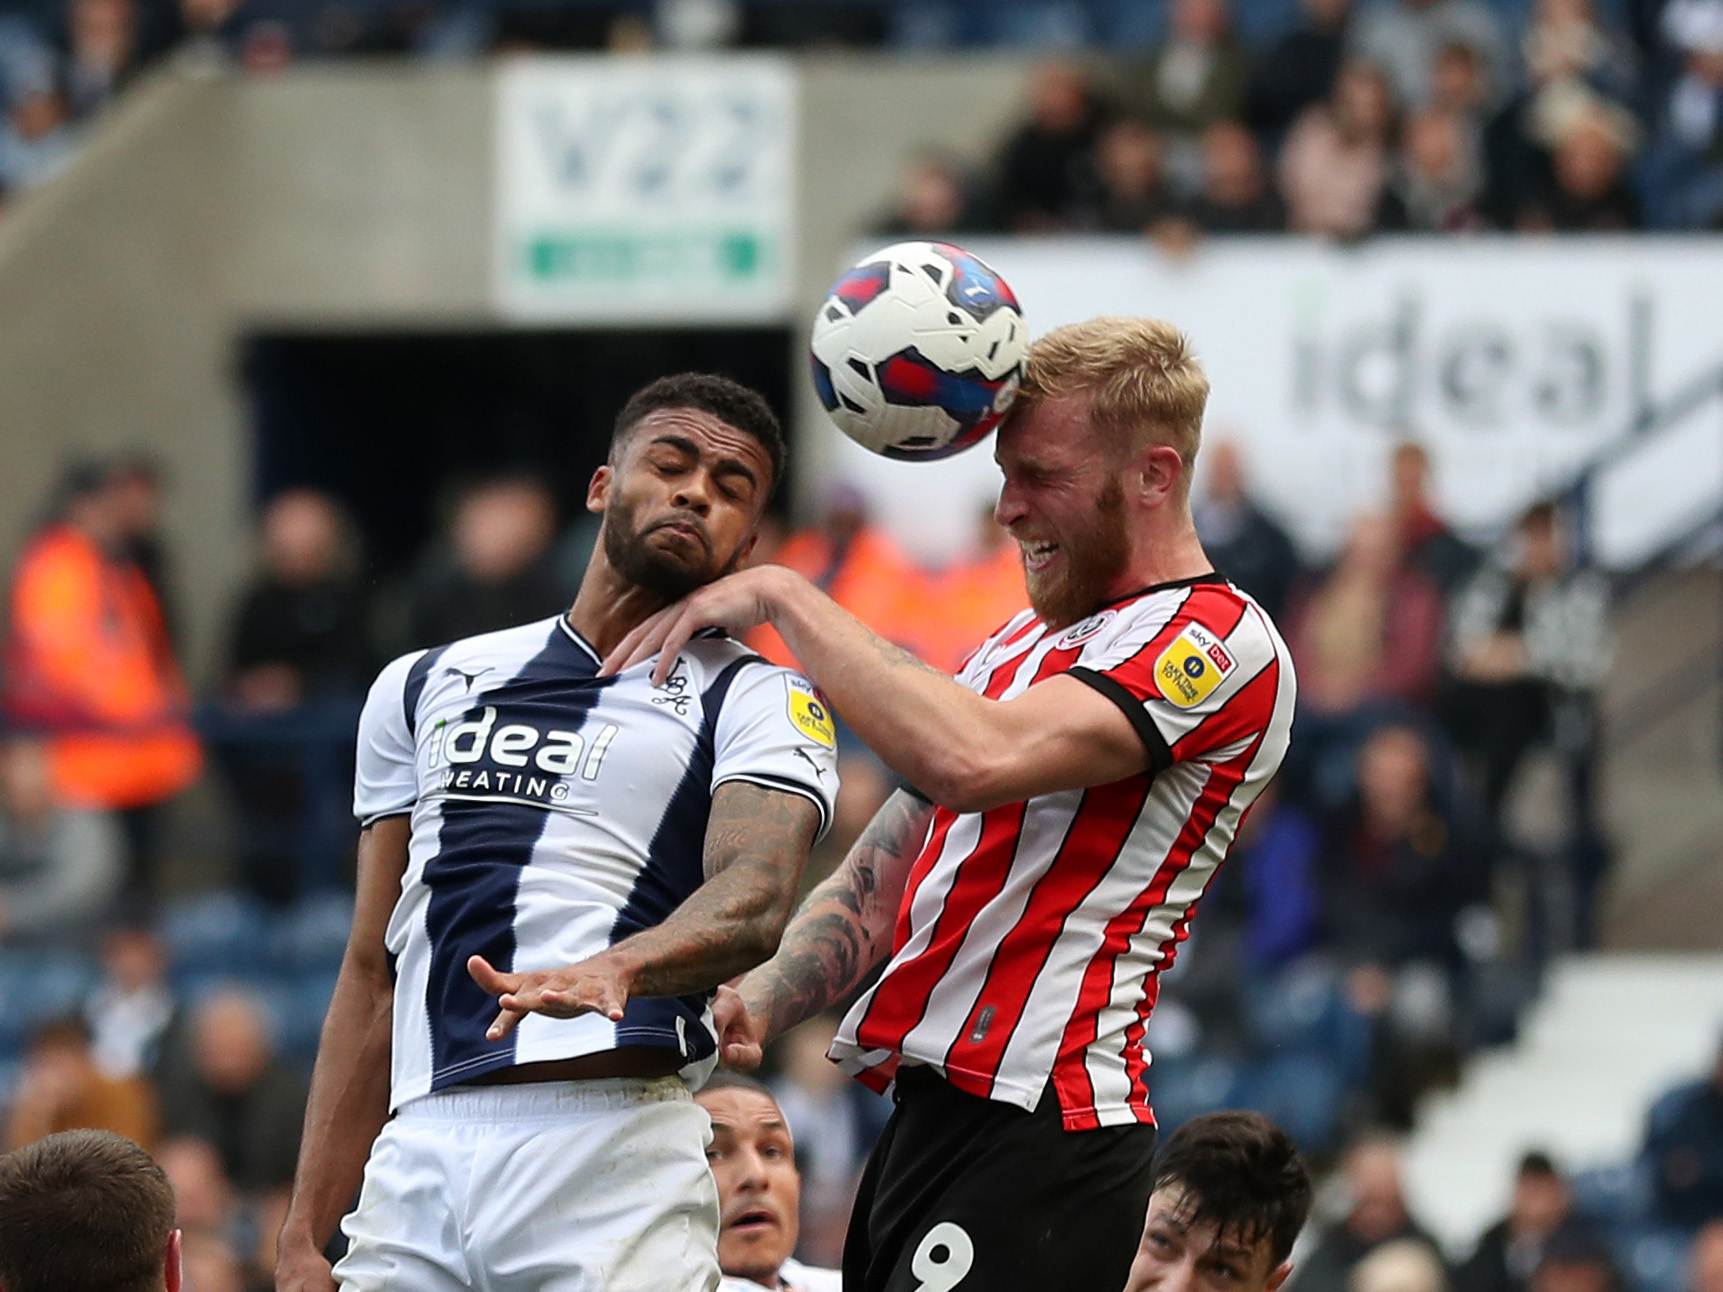 Darnell Furlong jumps for the ball with Sheffield United's Oli McBurnie